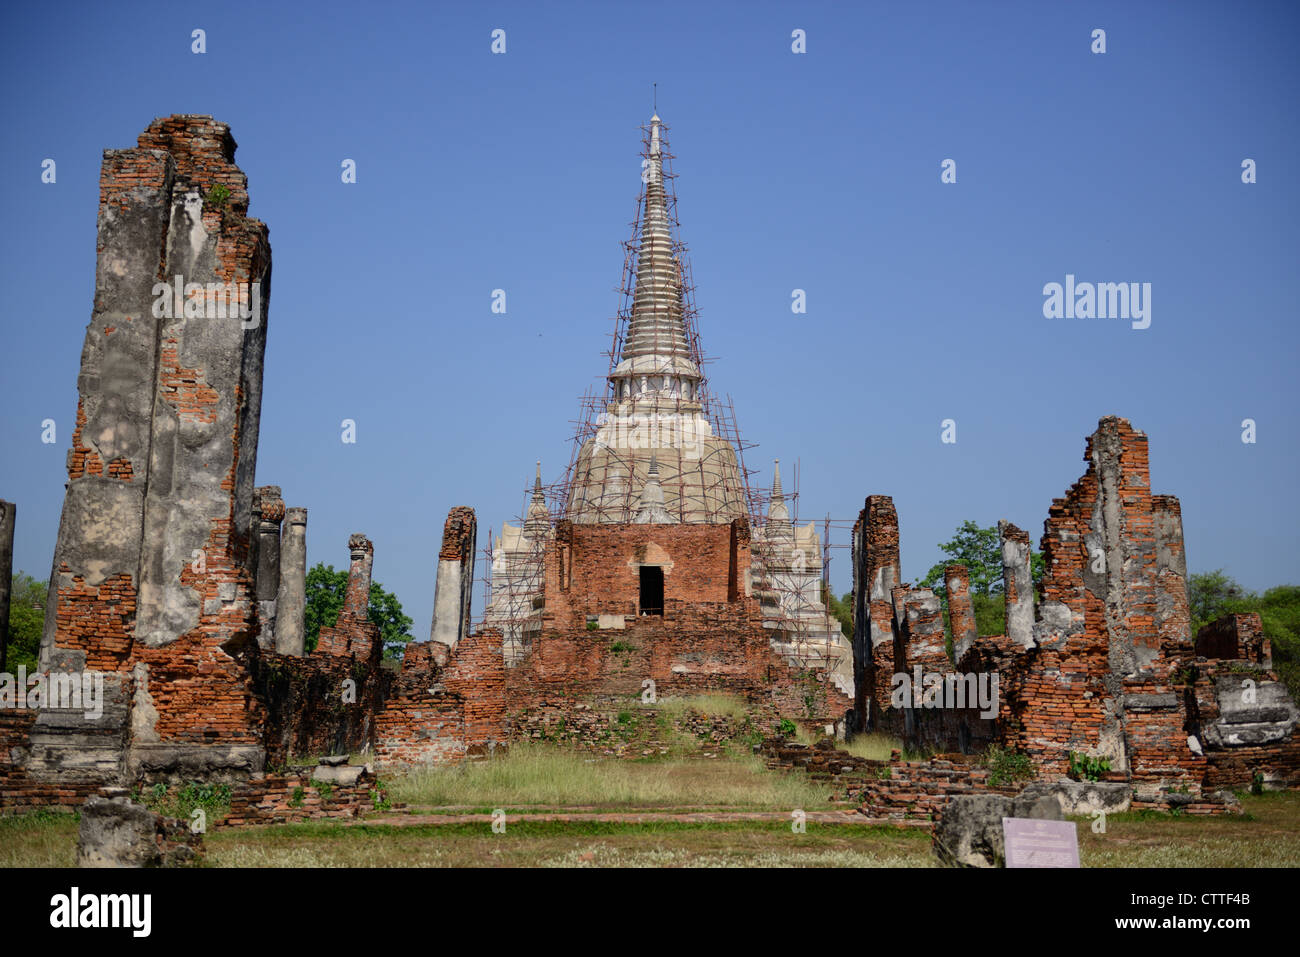 Wat Phra Si Sanphet was built in 1448 A D  on the site which had served for the royal palace,Ayutthaya Thailand Stock Photo